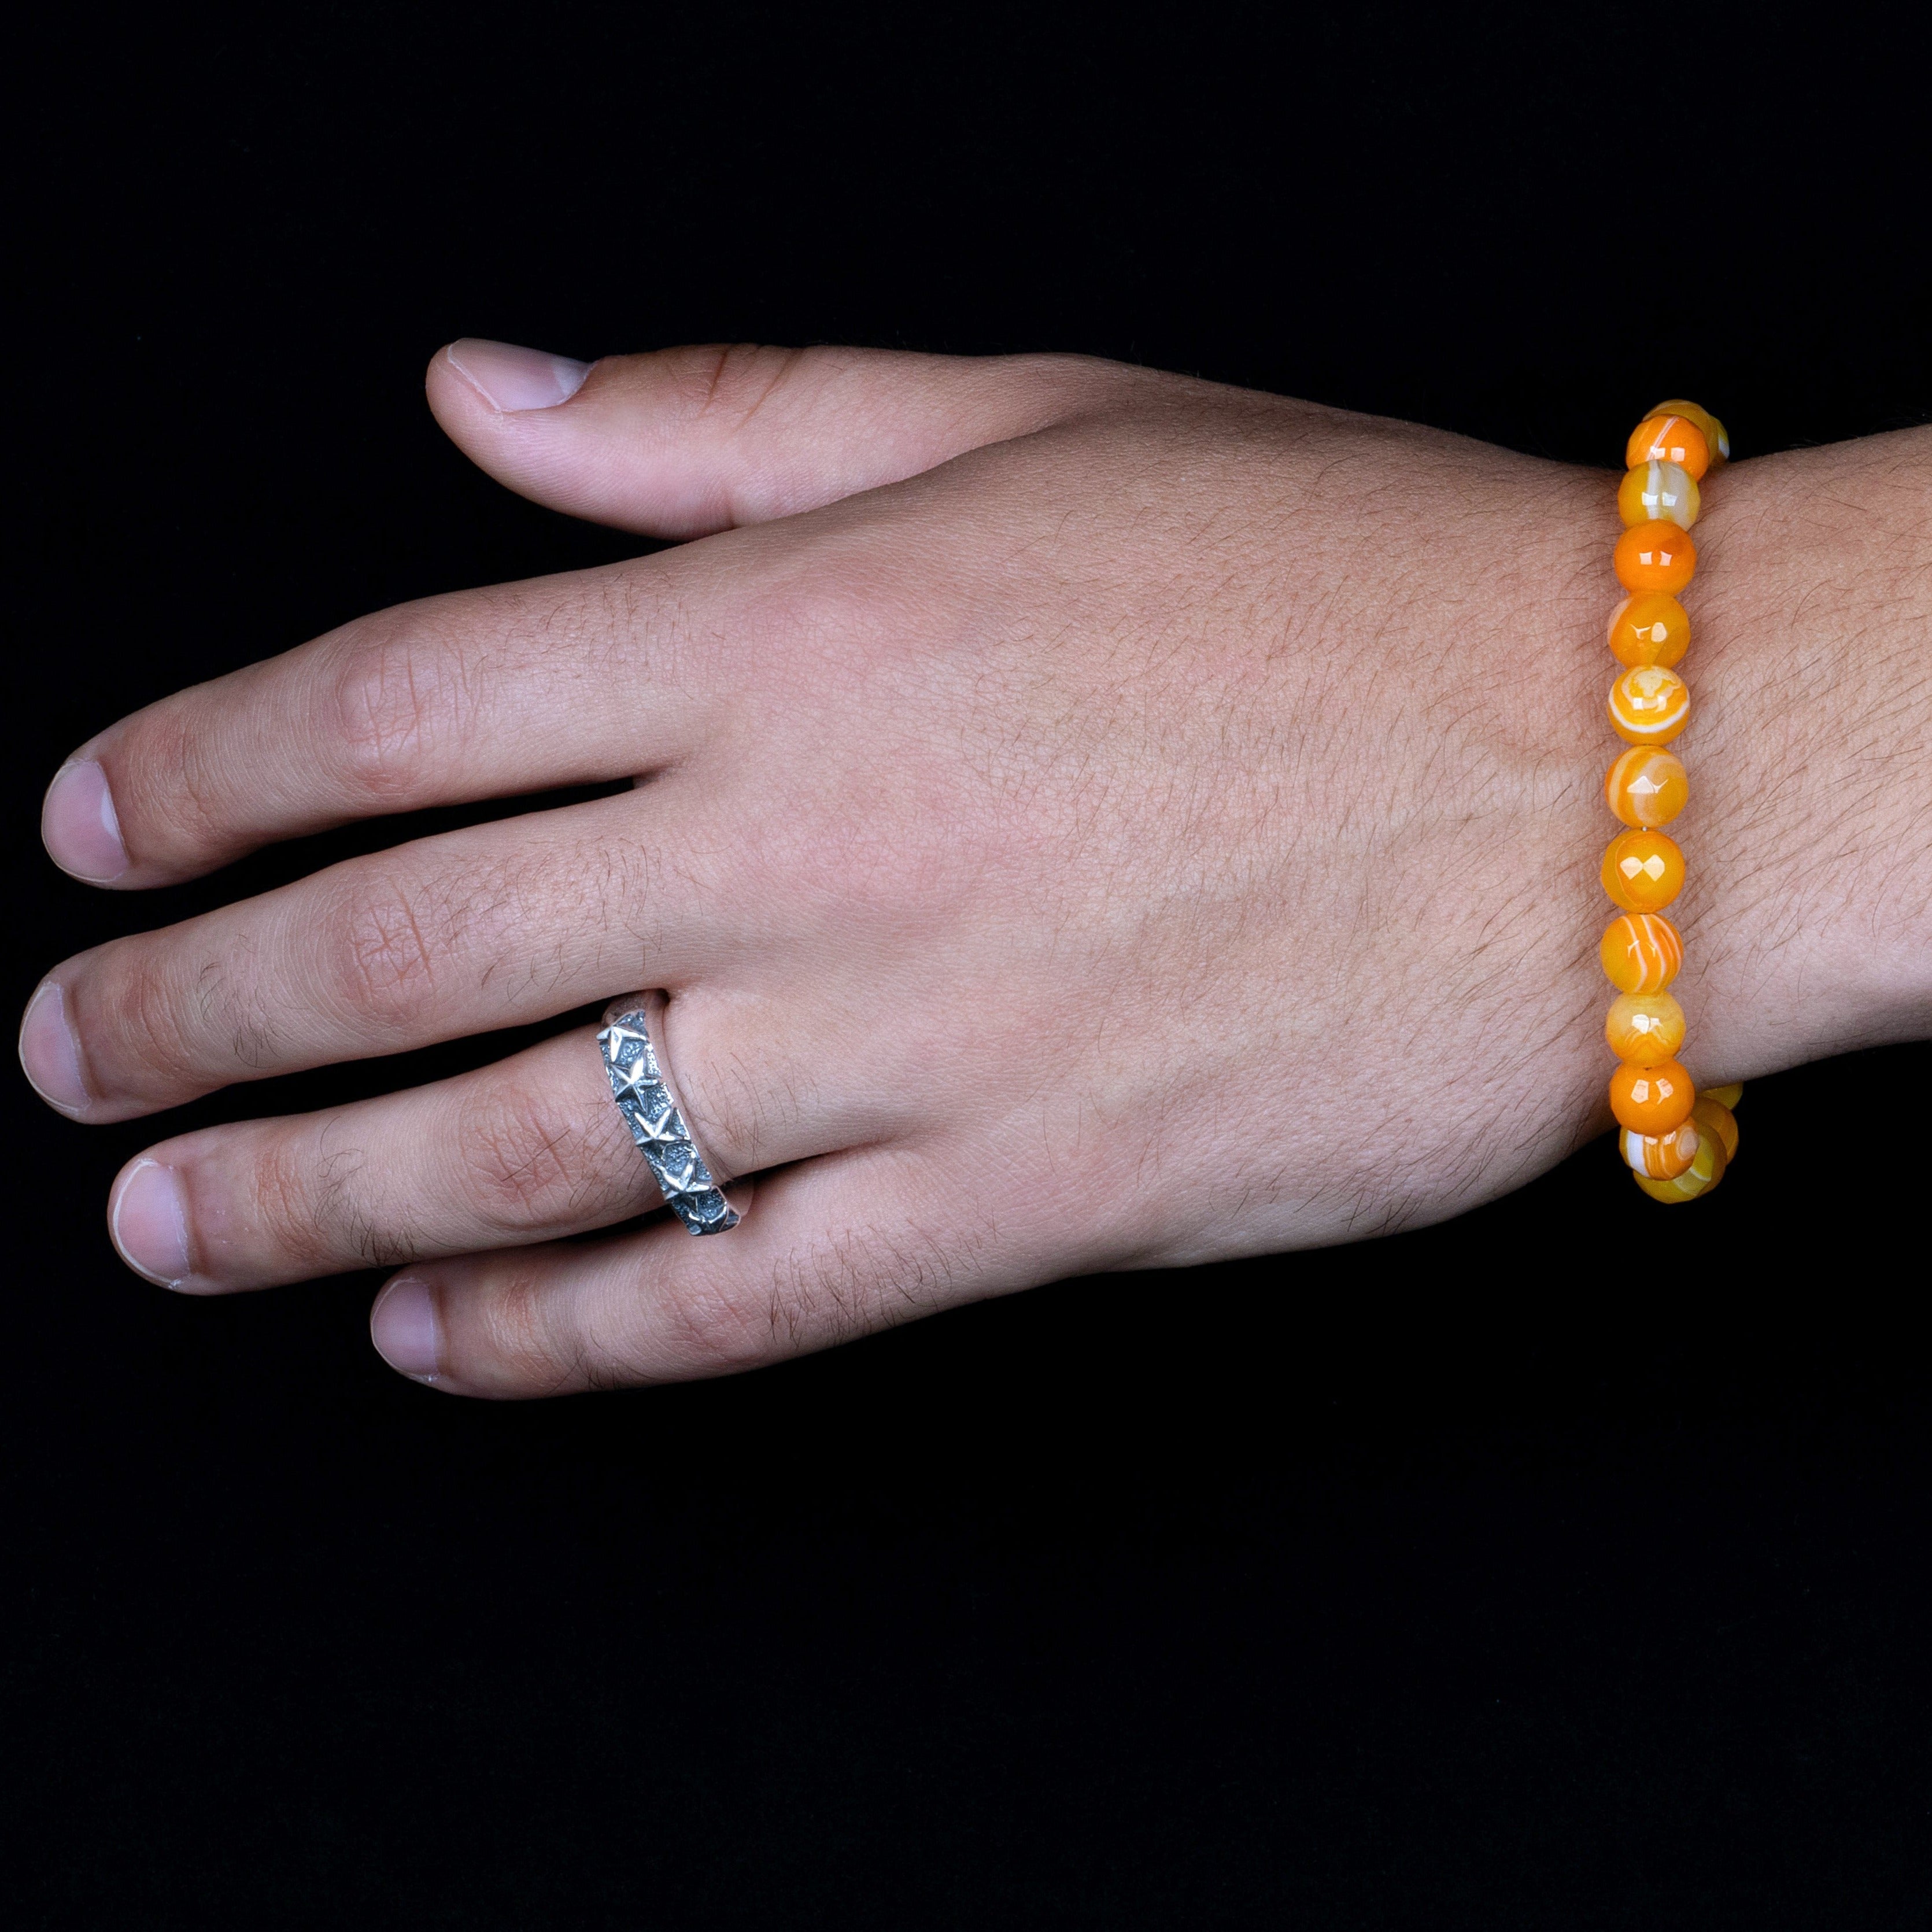 Faceted Mango Quartz beads on a stainless steel cable with Sterling silver T clasp. Shown on hand model.